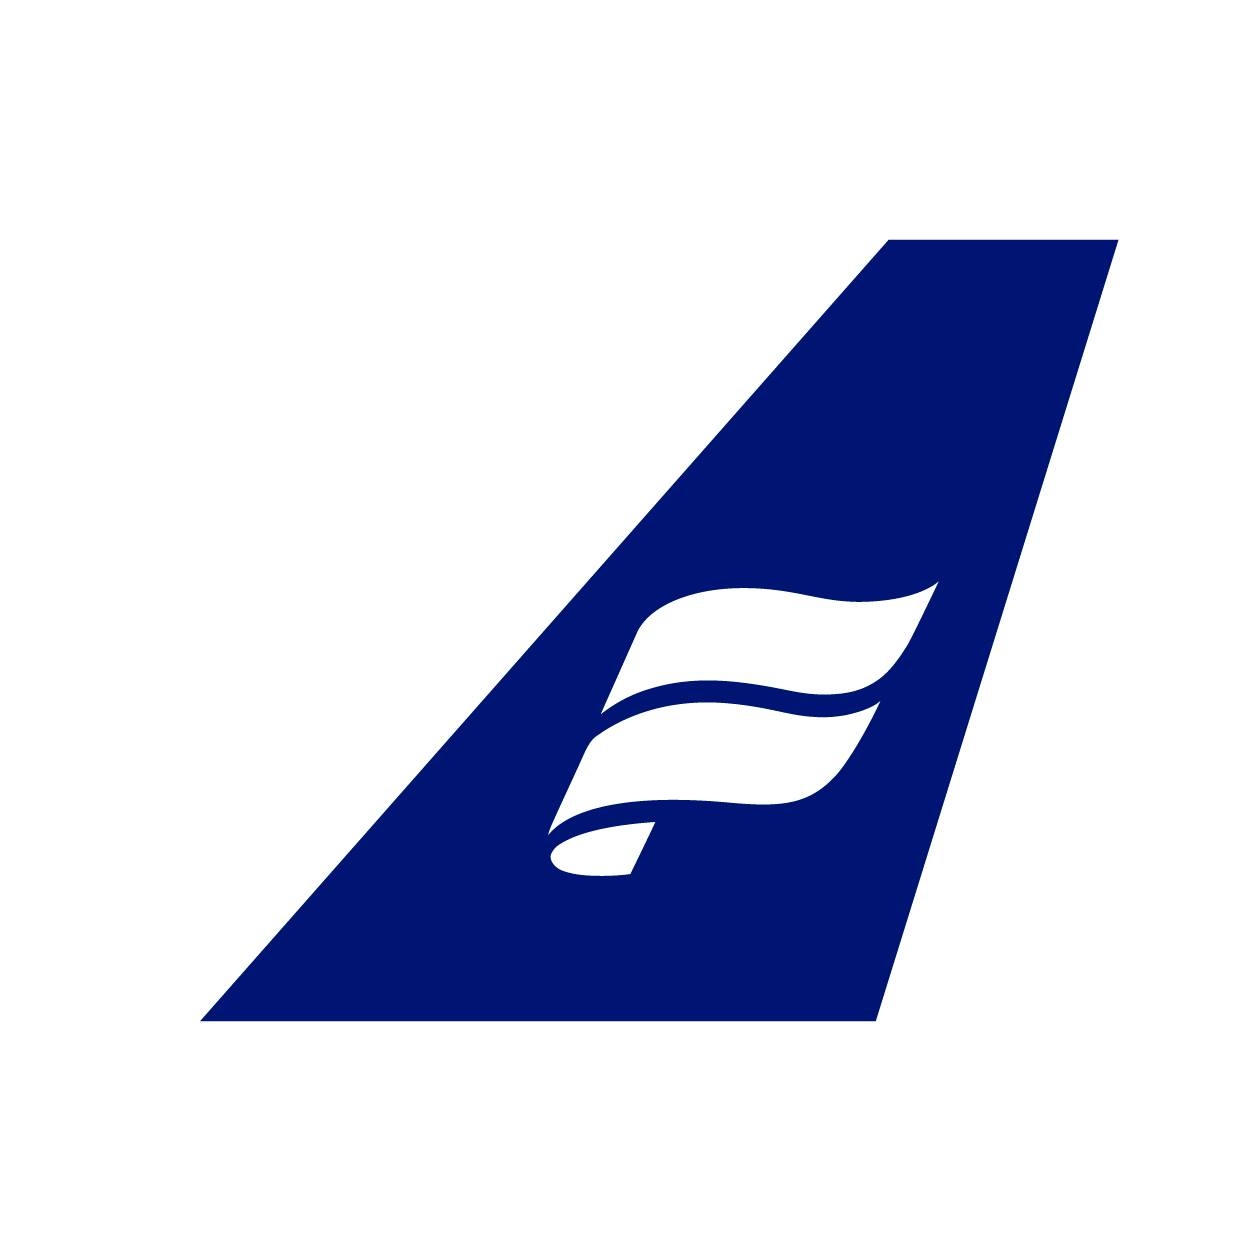 Airline Logos Quiz - Can You Guess Them All Correctly? - ProProfs Quiz